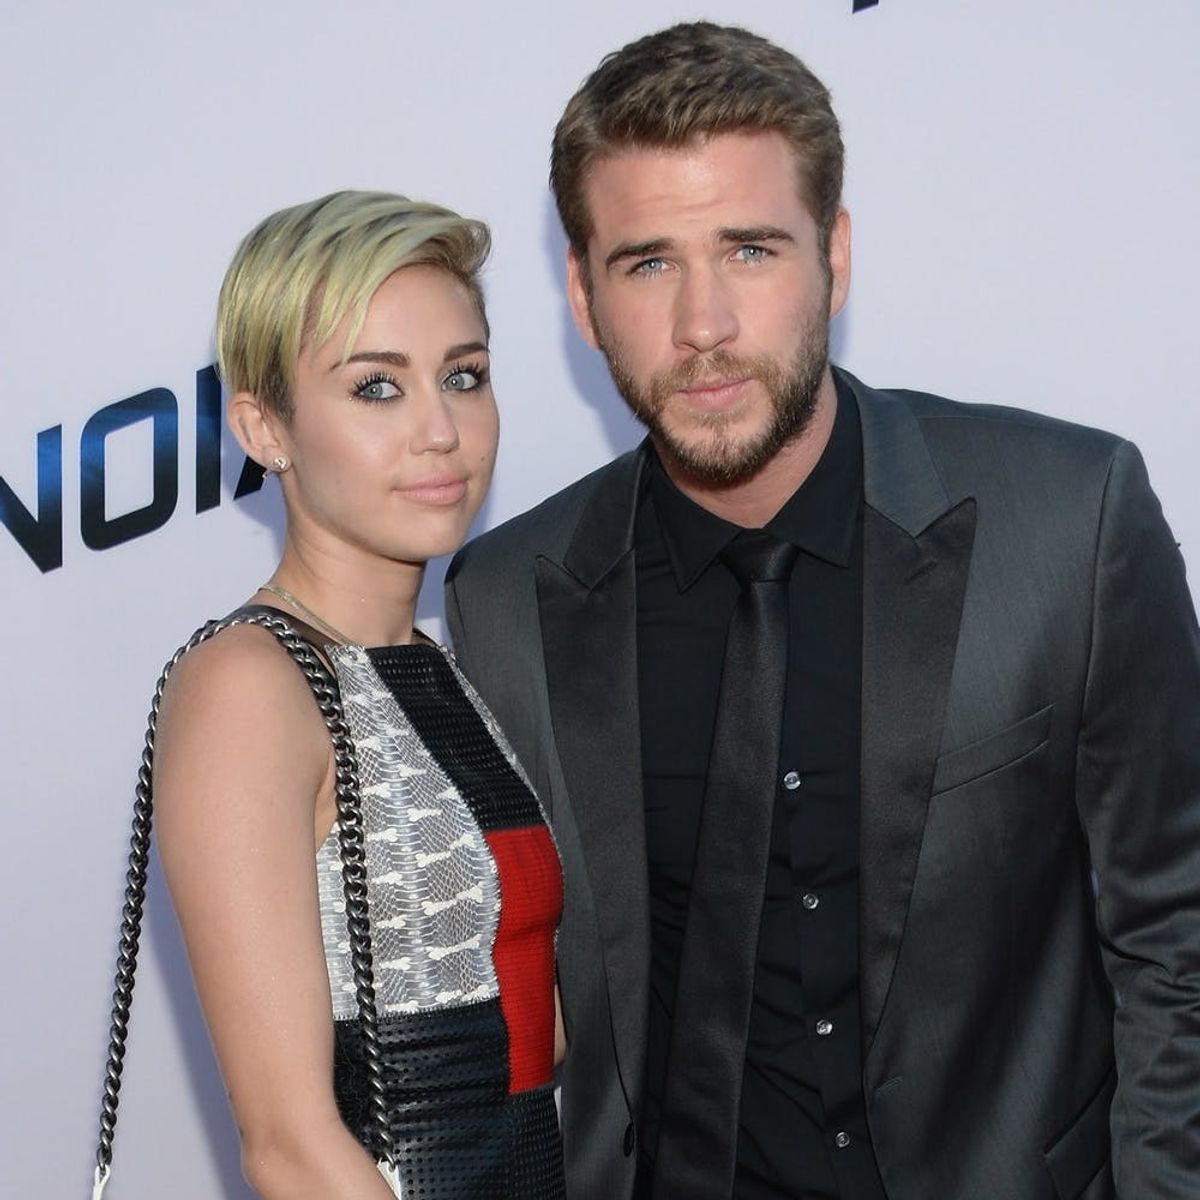 Whoa: Did Miley Cyrus Just Become a Mrs?